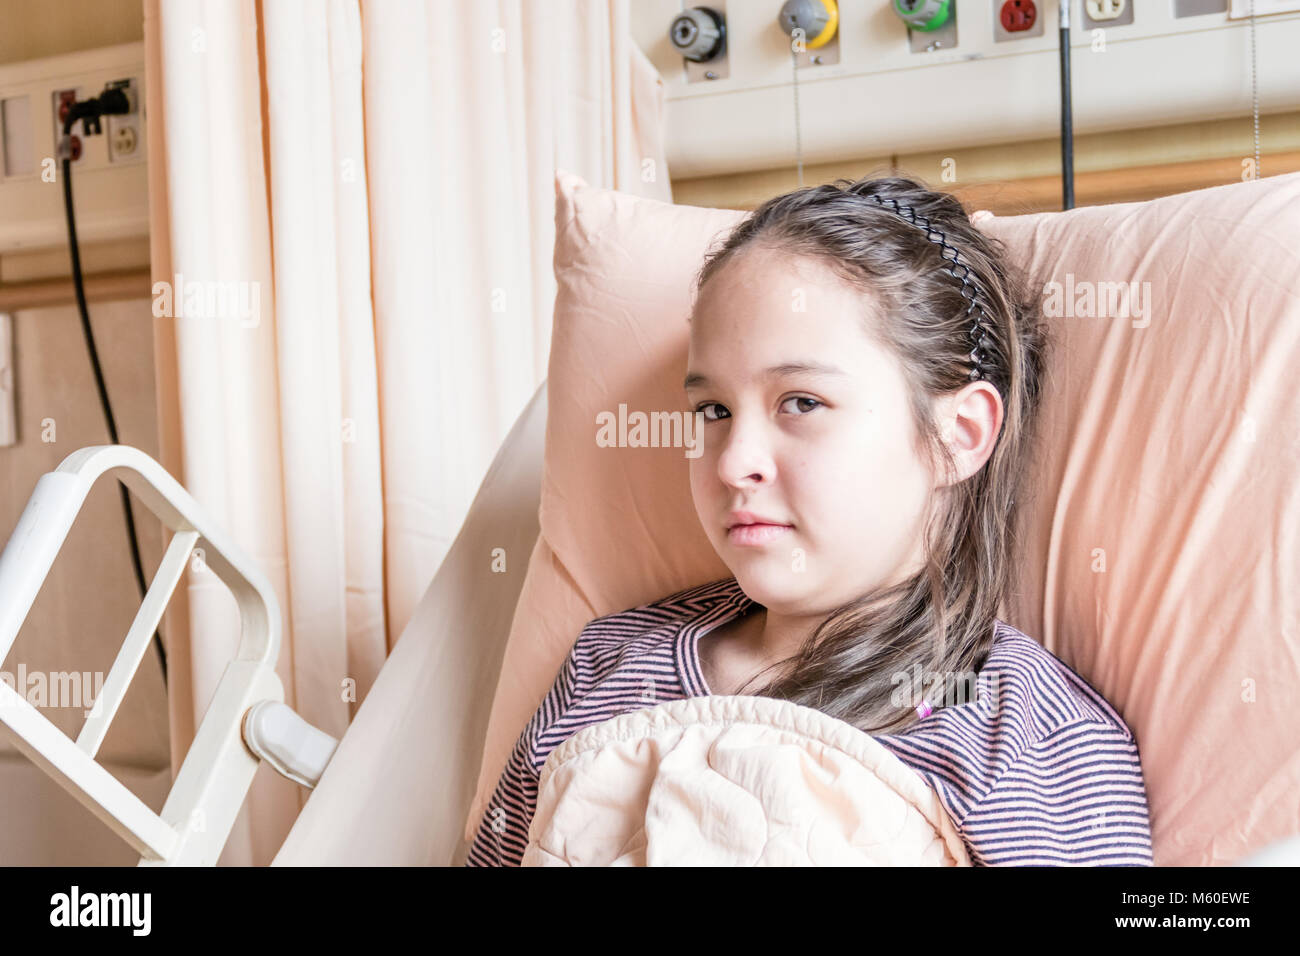 Asian American tween girl lying in hospital bed, health care concept Stock Photo